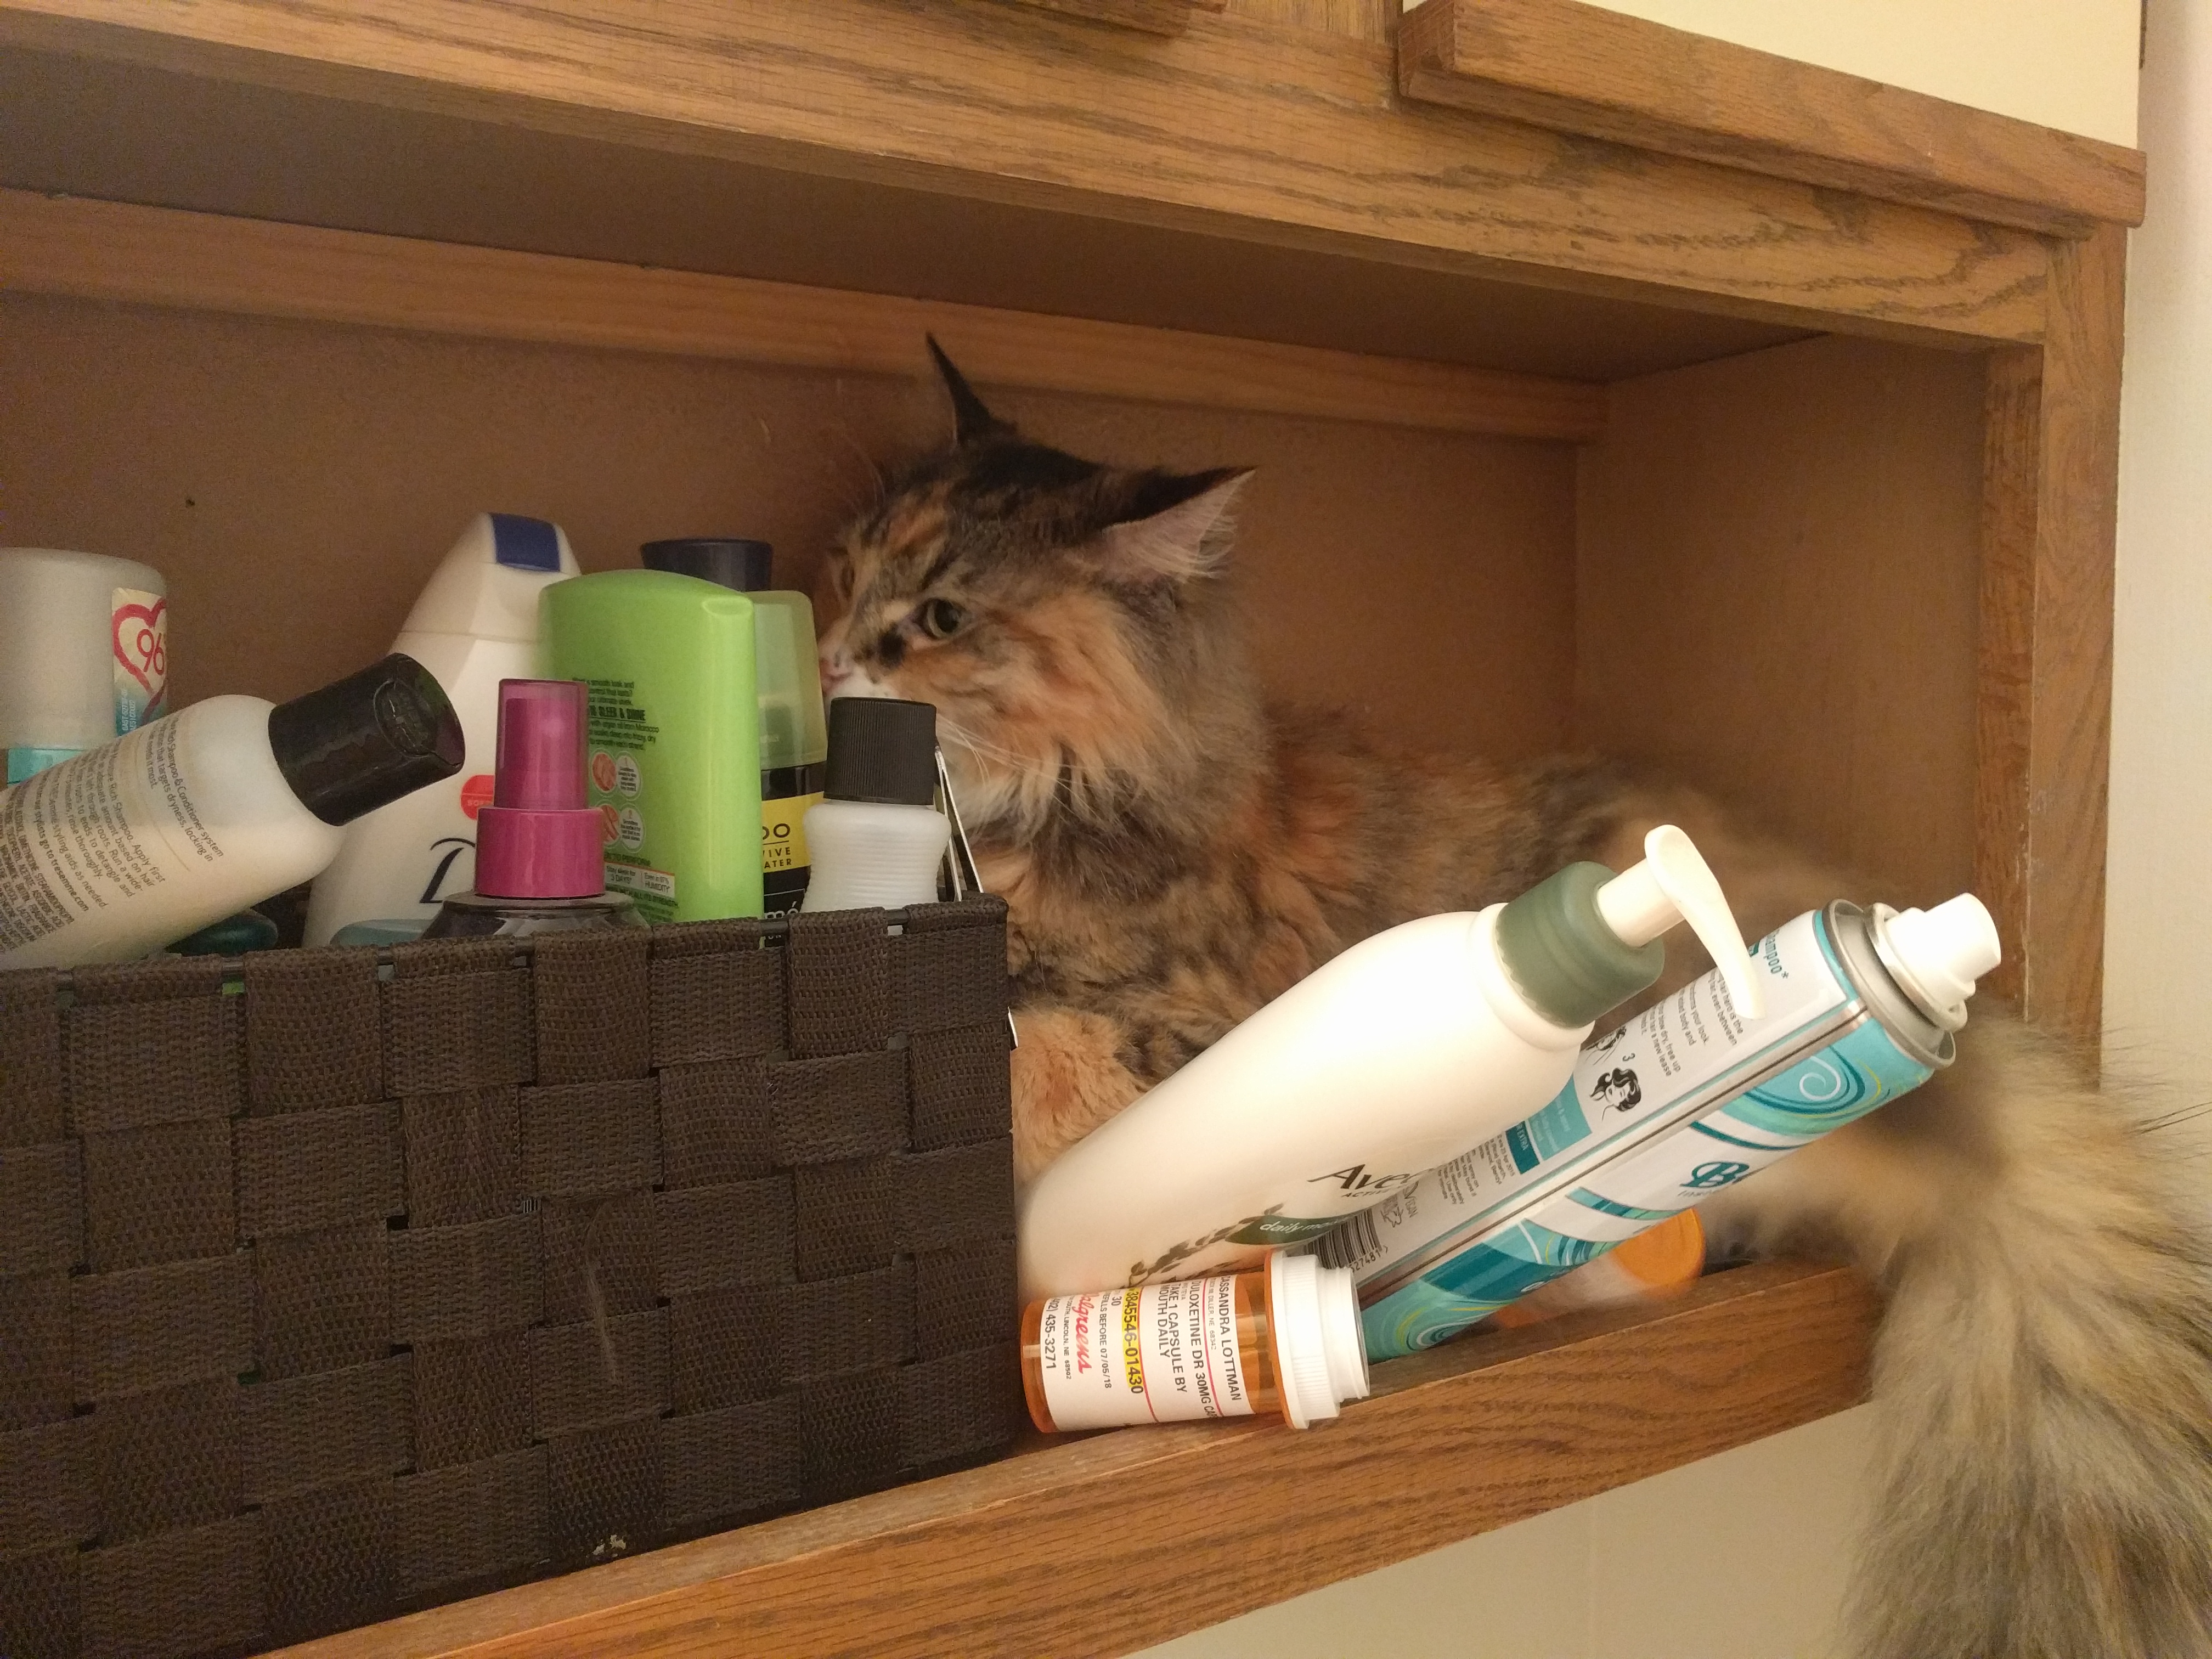 Tally sitting on a narrow shelf surrounded by beauty products that are about to fall off the shelf